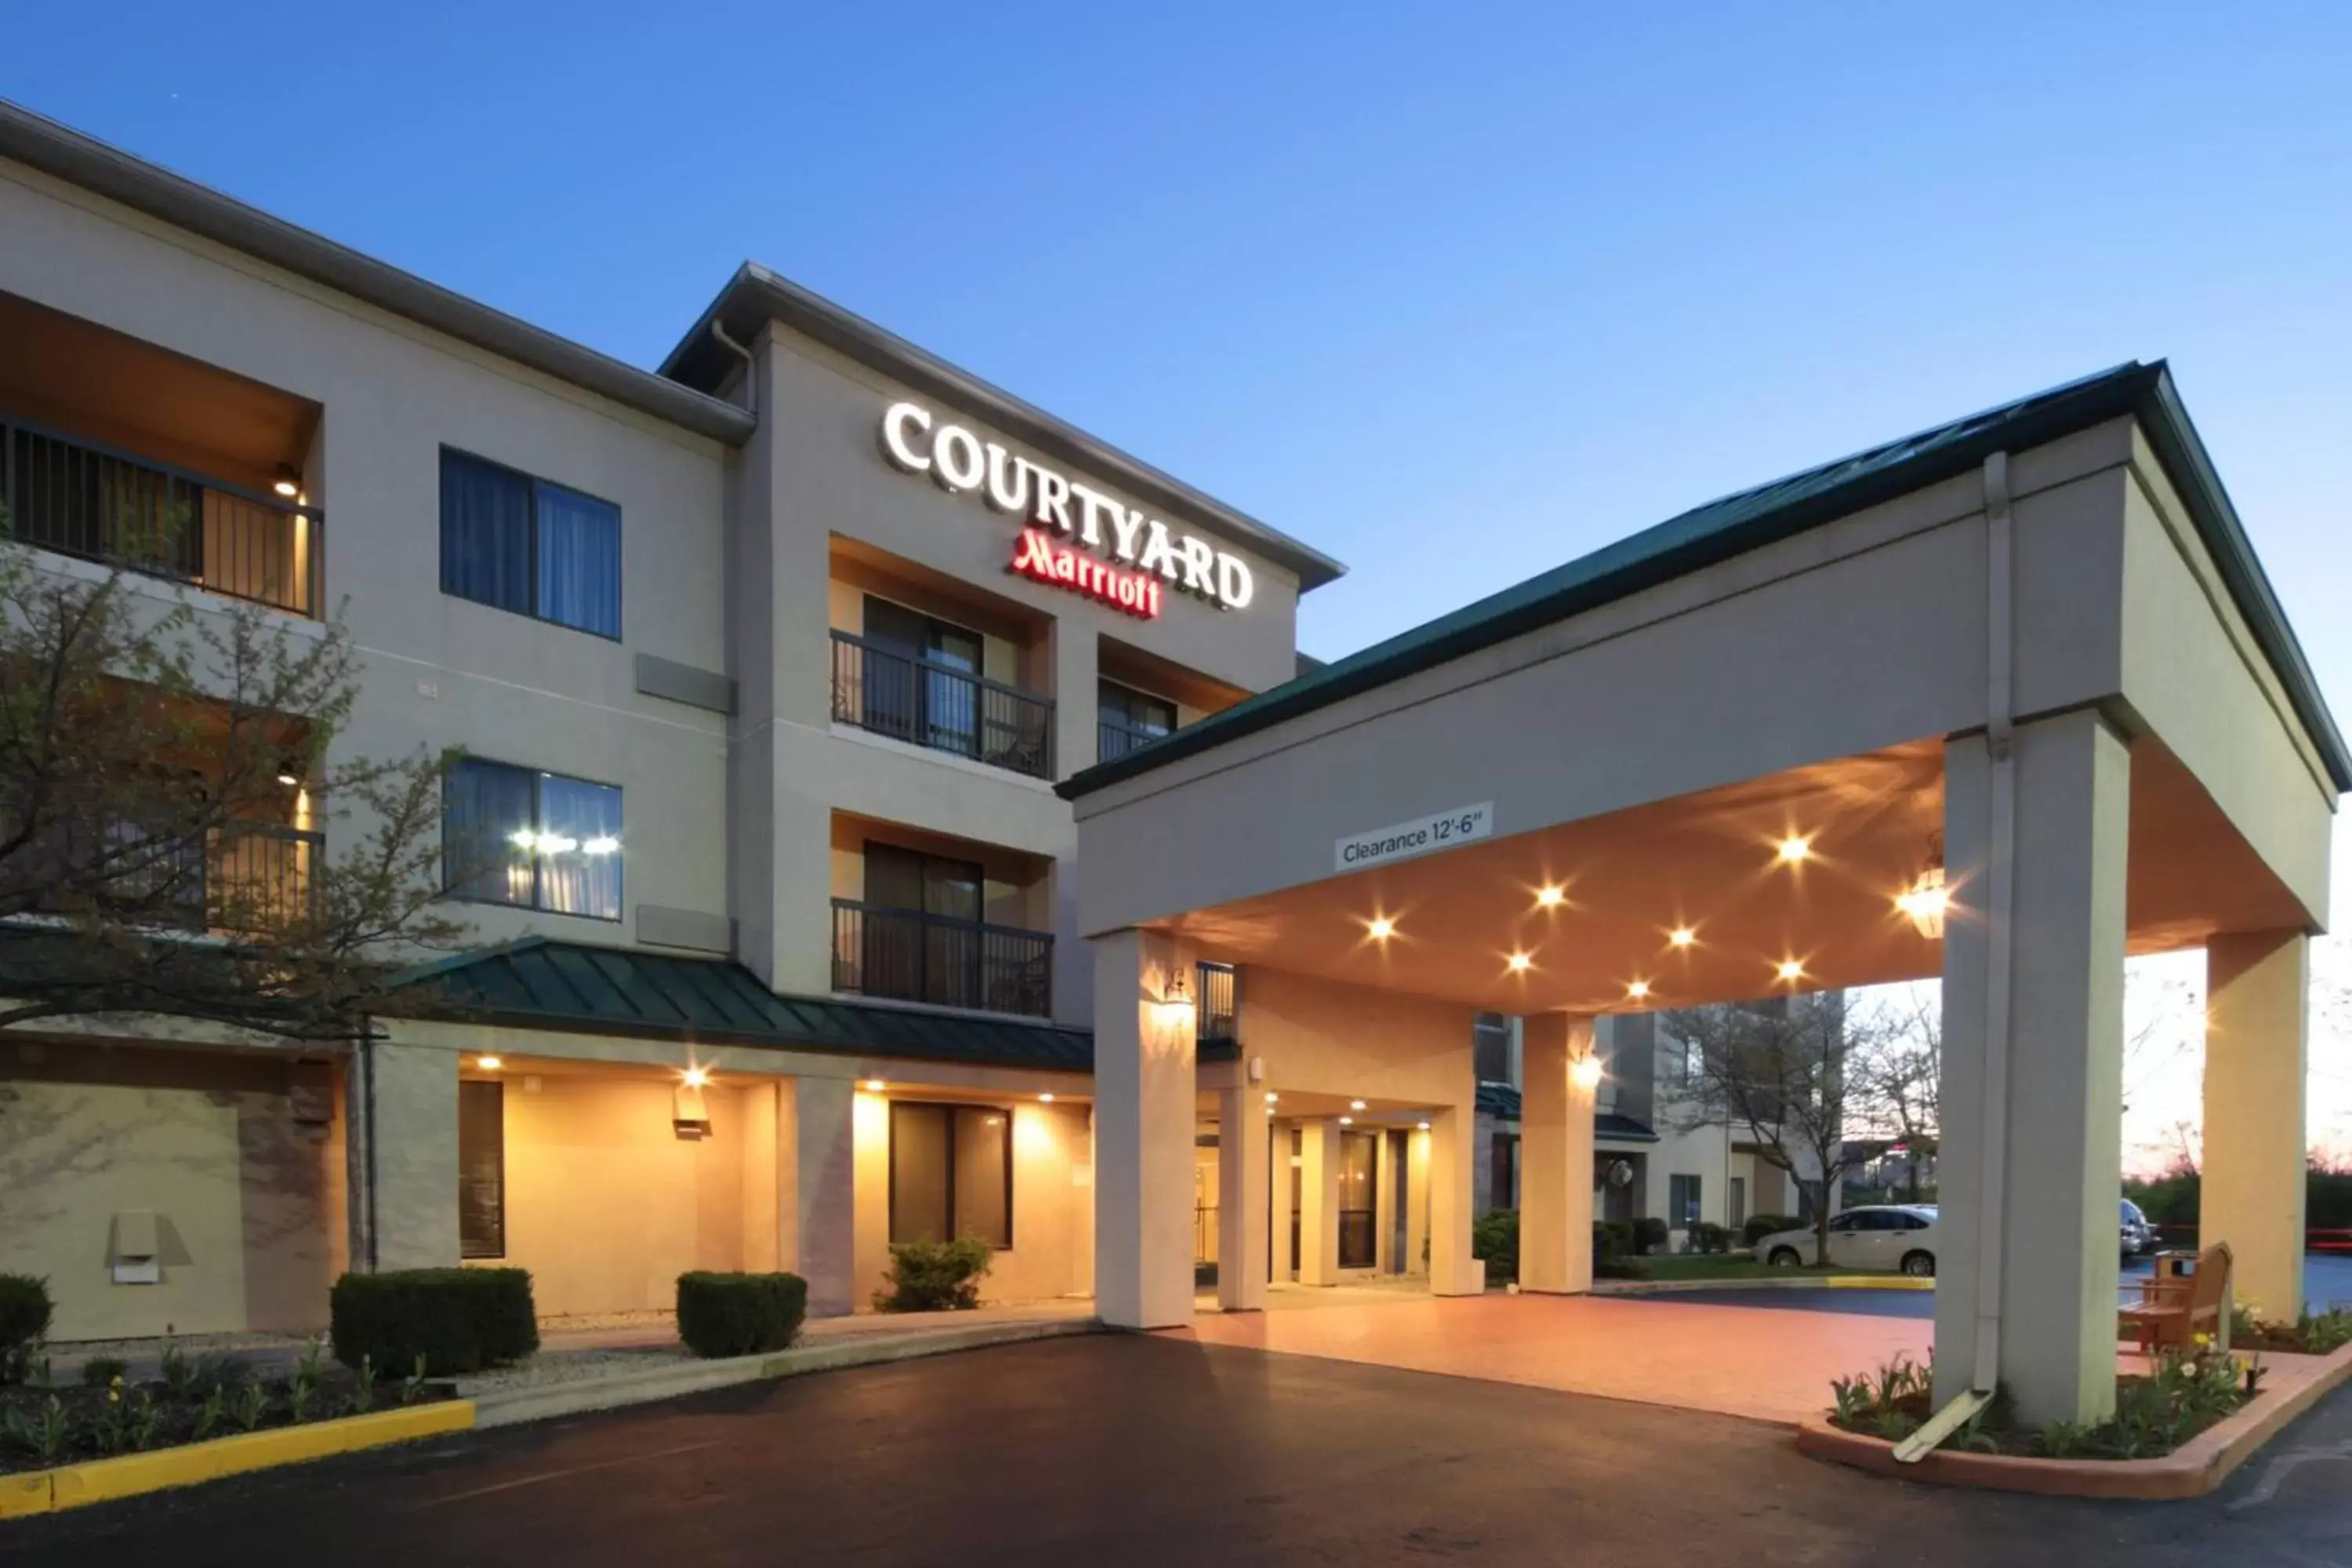 Property Building in Courtyard by Marriott Dayton North